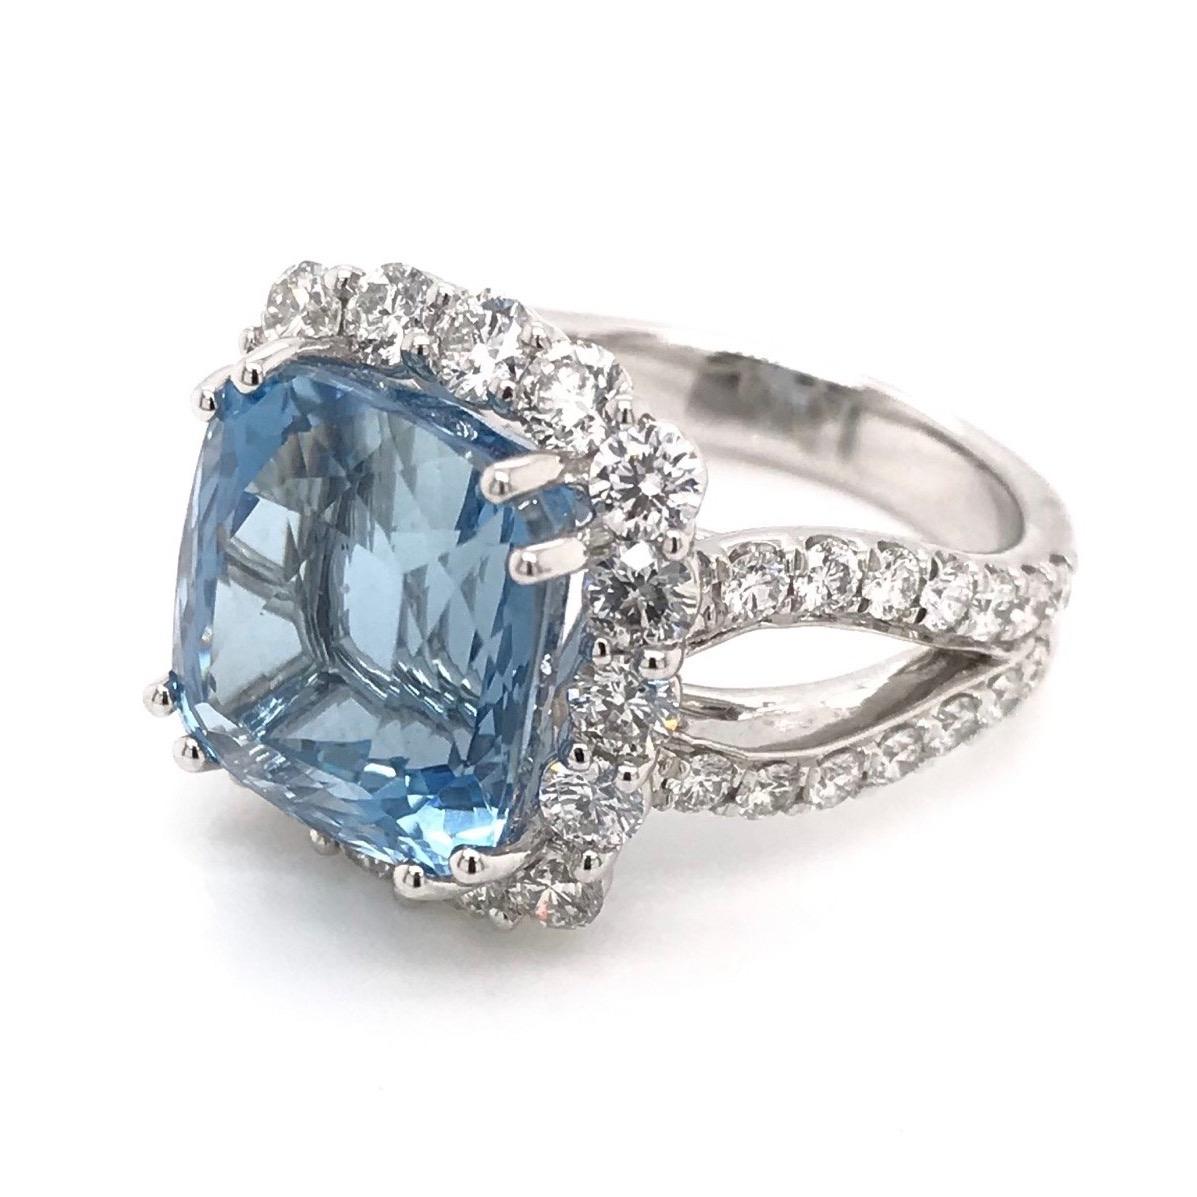 This stunning jewelry piece is newly crafted and never worn. The 18k white gold setting features a custom cut 7.94 carat Santa Maria aquamarine. The aquamarine has been certified by The Gemological Institution of America ( GIA ). Santa Maria